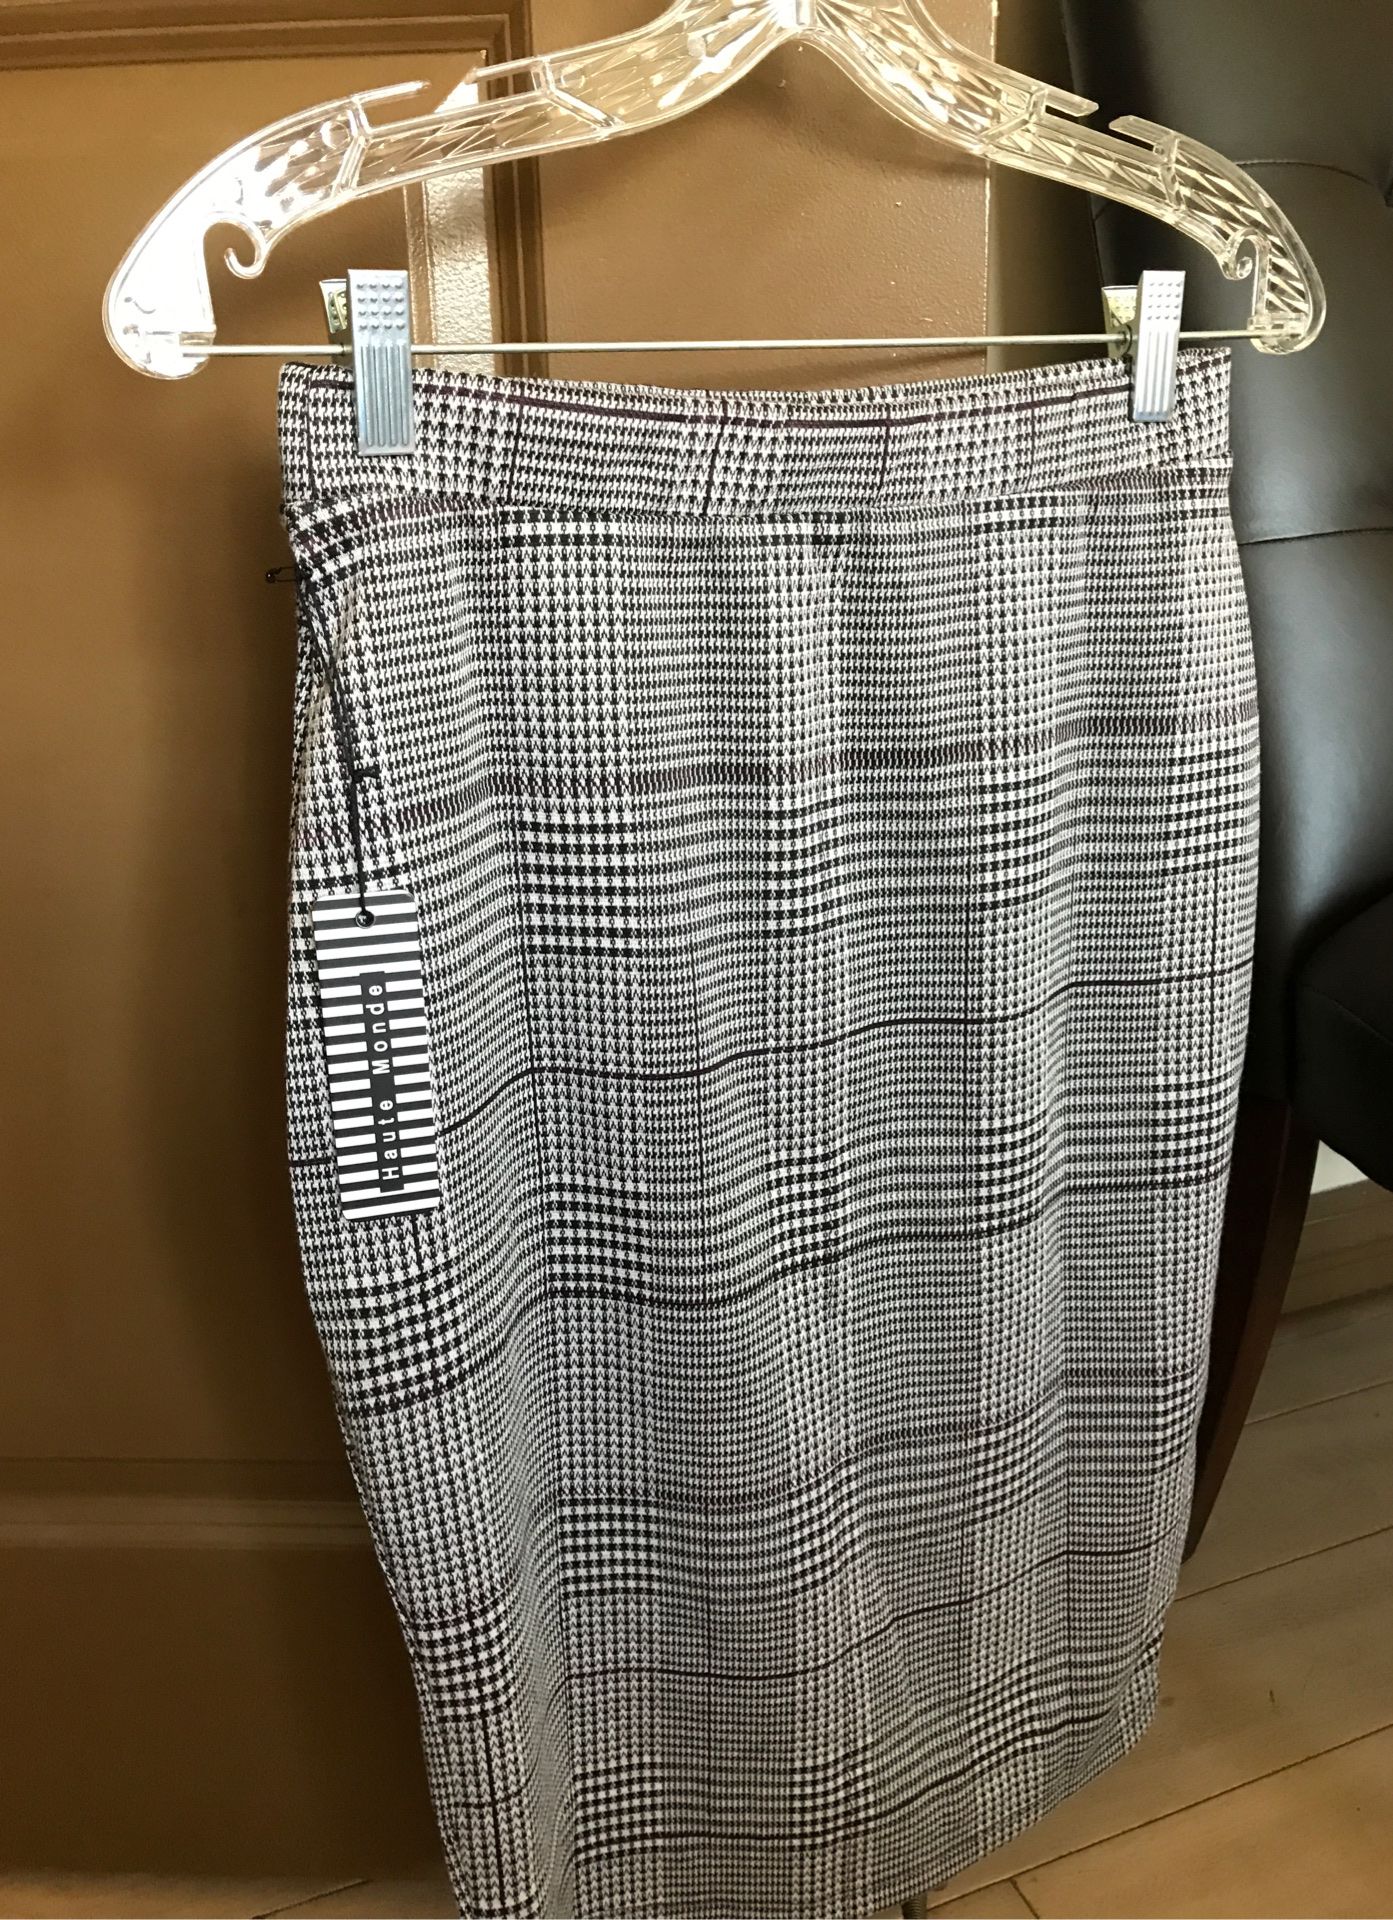 Pencil skirt size S